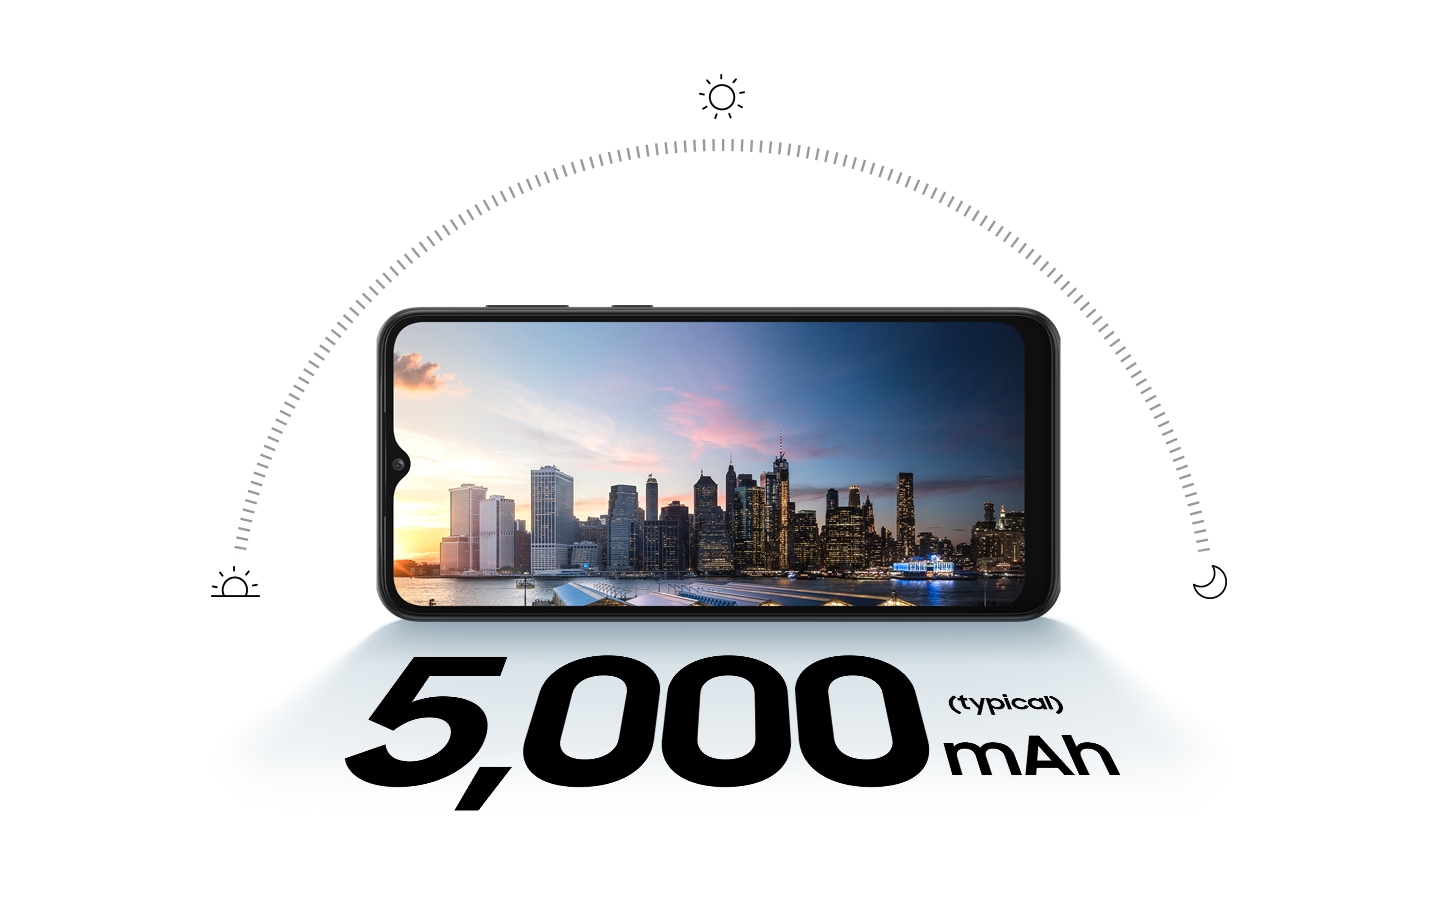 Galaxy A03 Core in landscape mode and a city skyline at sunset onscreen. Above the phone is semi-circle showing the sun's path through the day, with icons of a sun rising, shining sun and a moon to depict sunrise, mid-day and night. Text says 5000 mAh (typical).